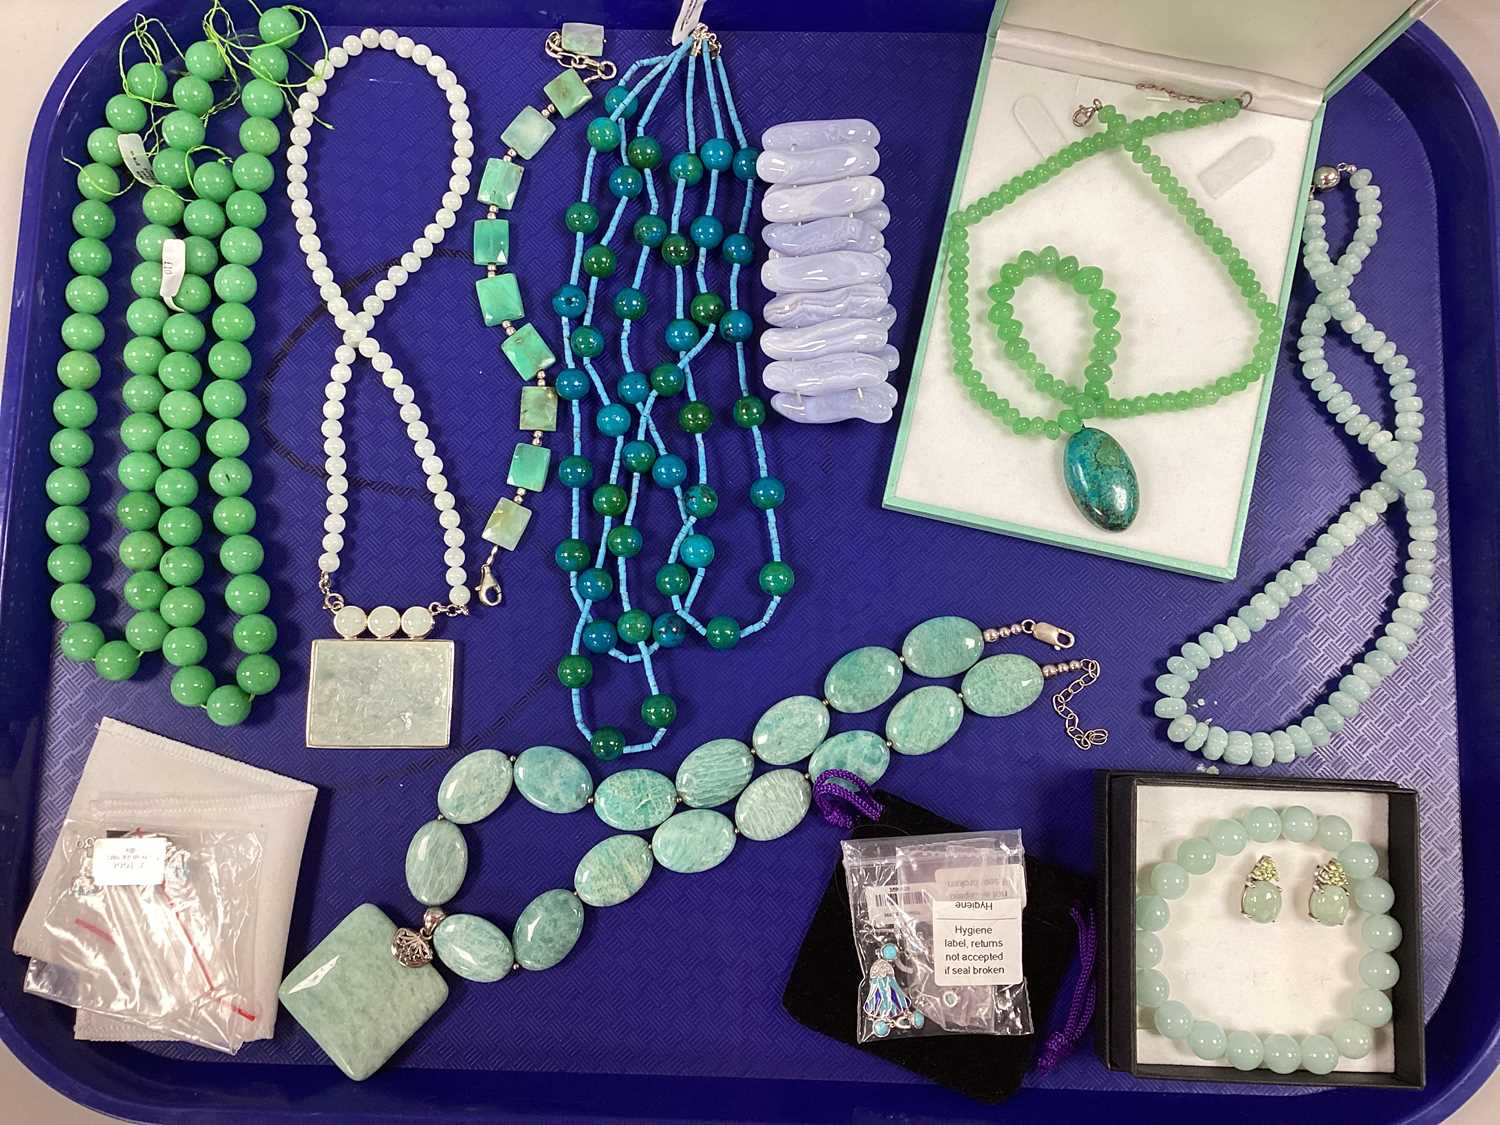 Modern Polished Bead Necklaces, "925 China" jade panel necklace, oval cabochon earrings etc :- One